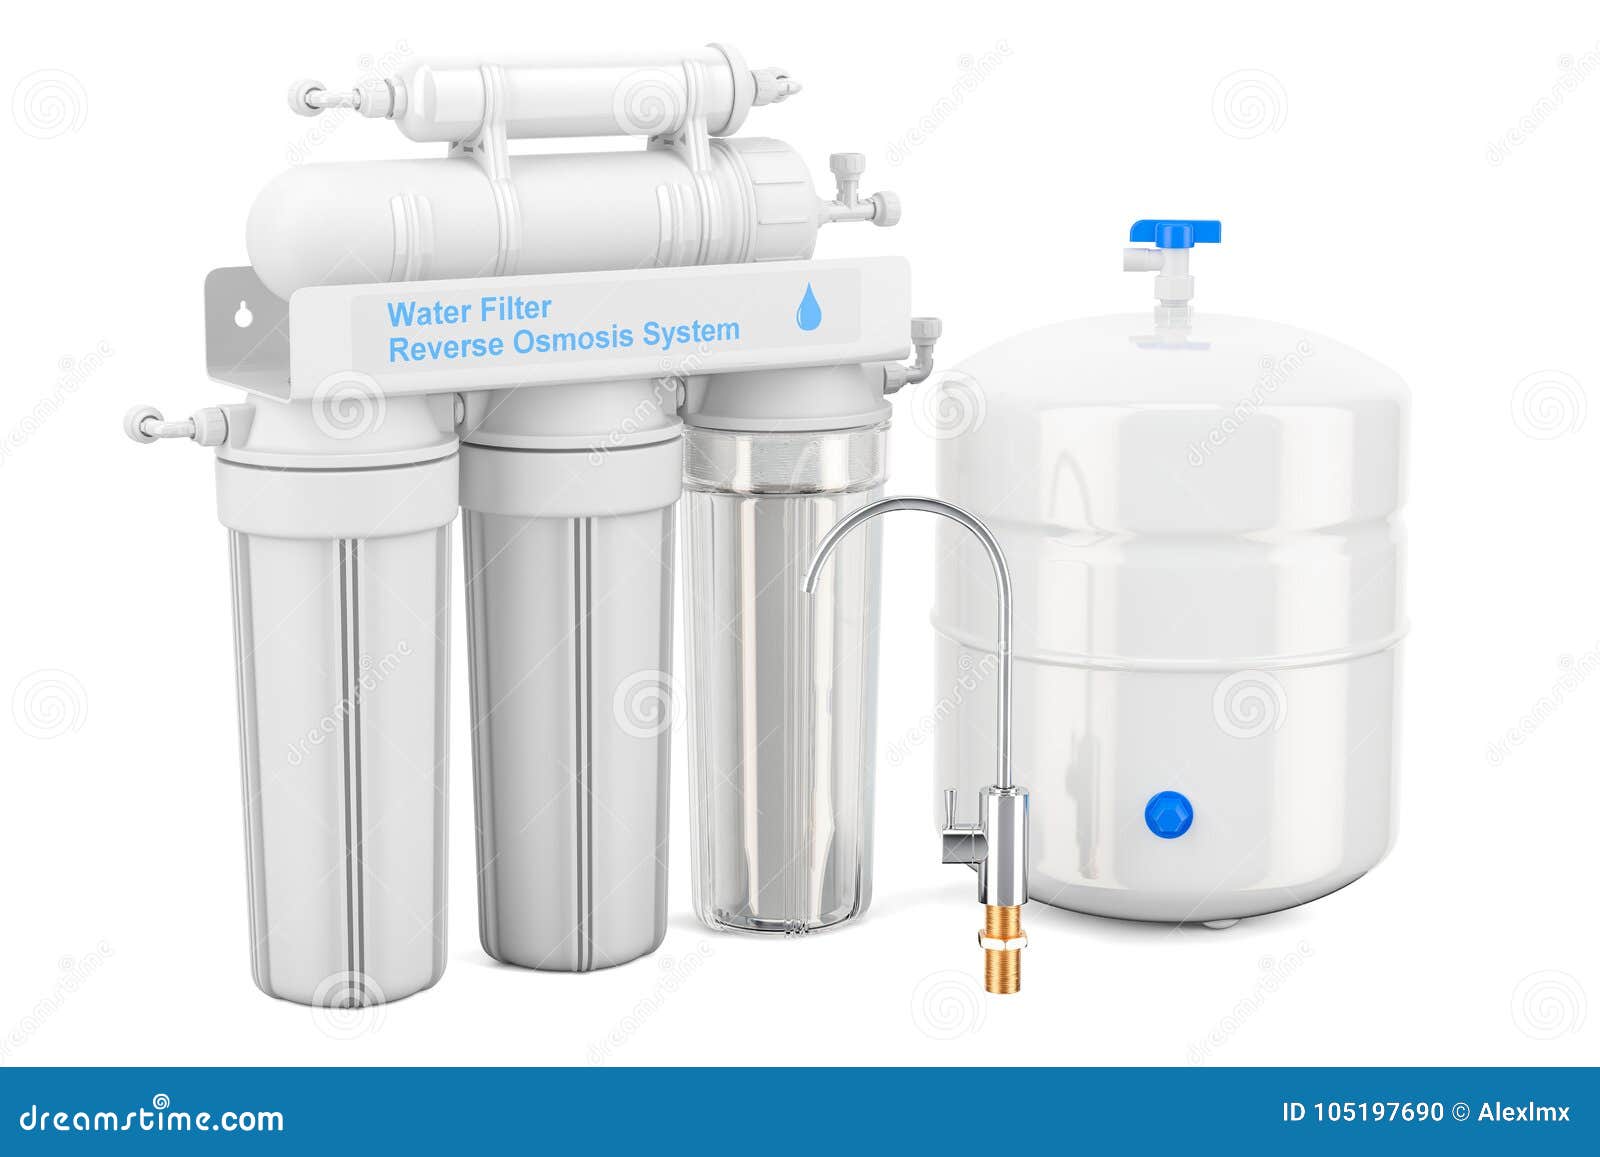 reverse osmosis system, 3d